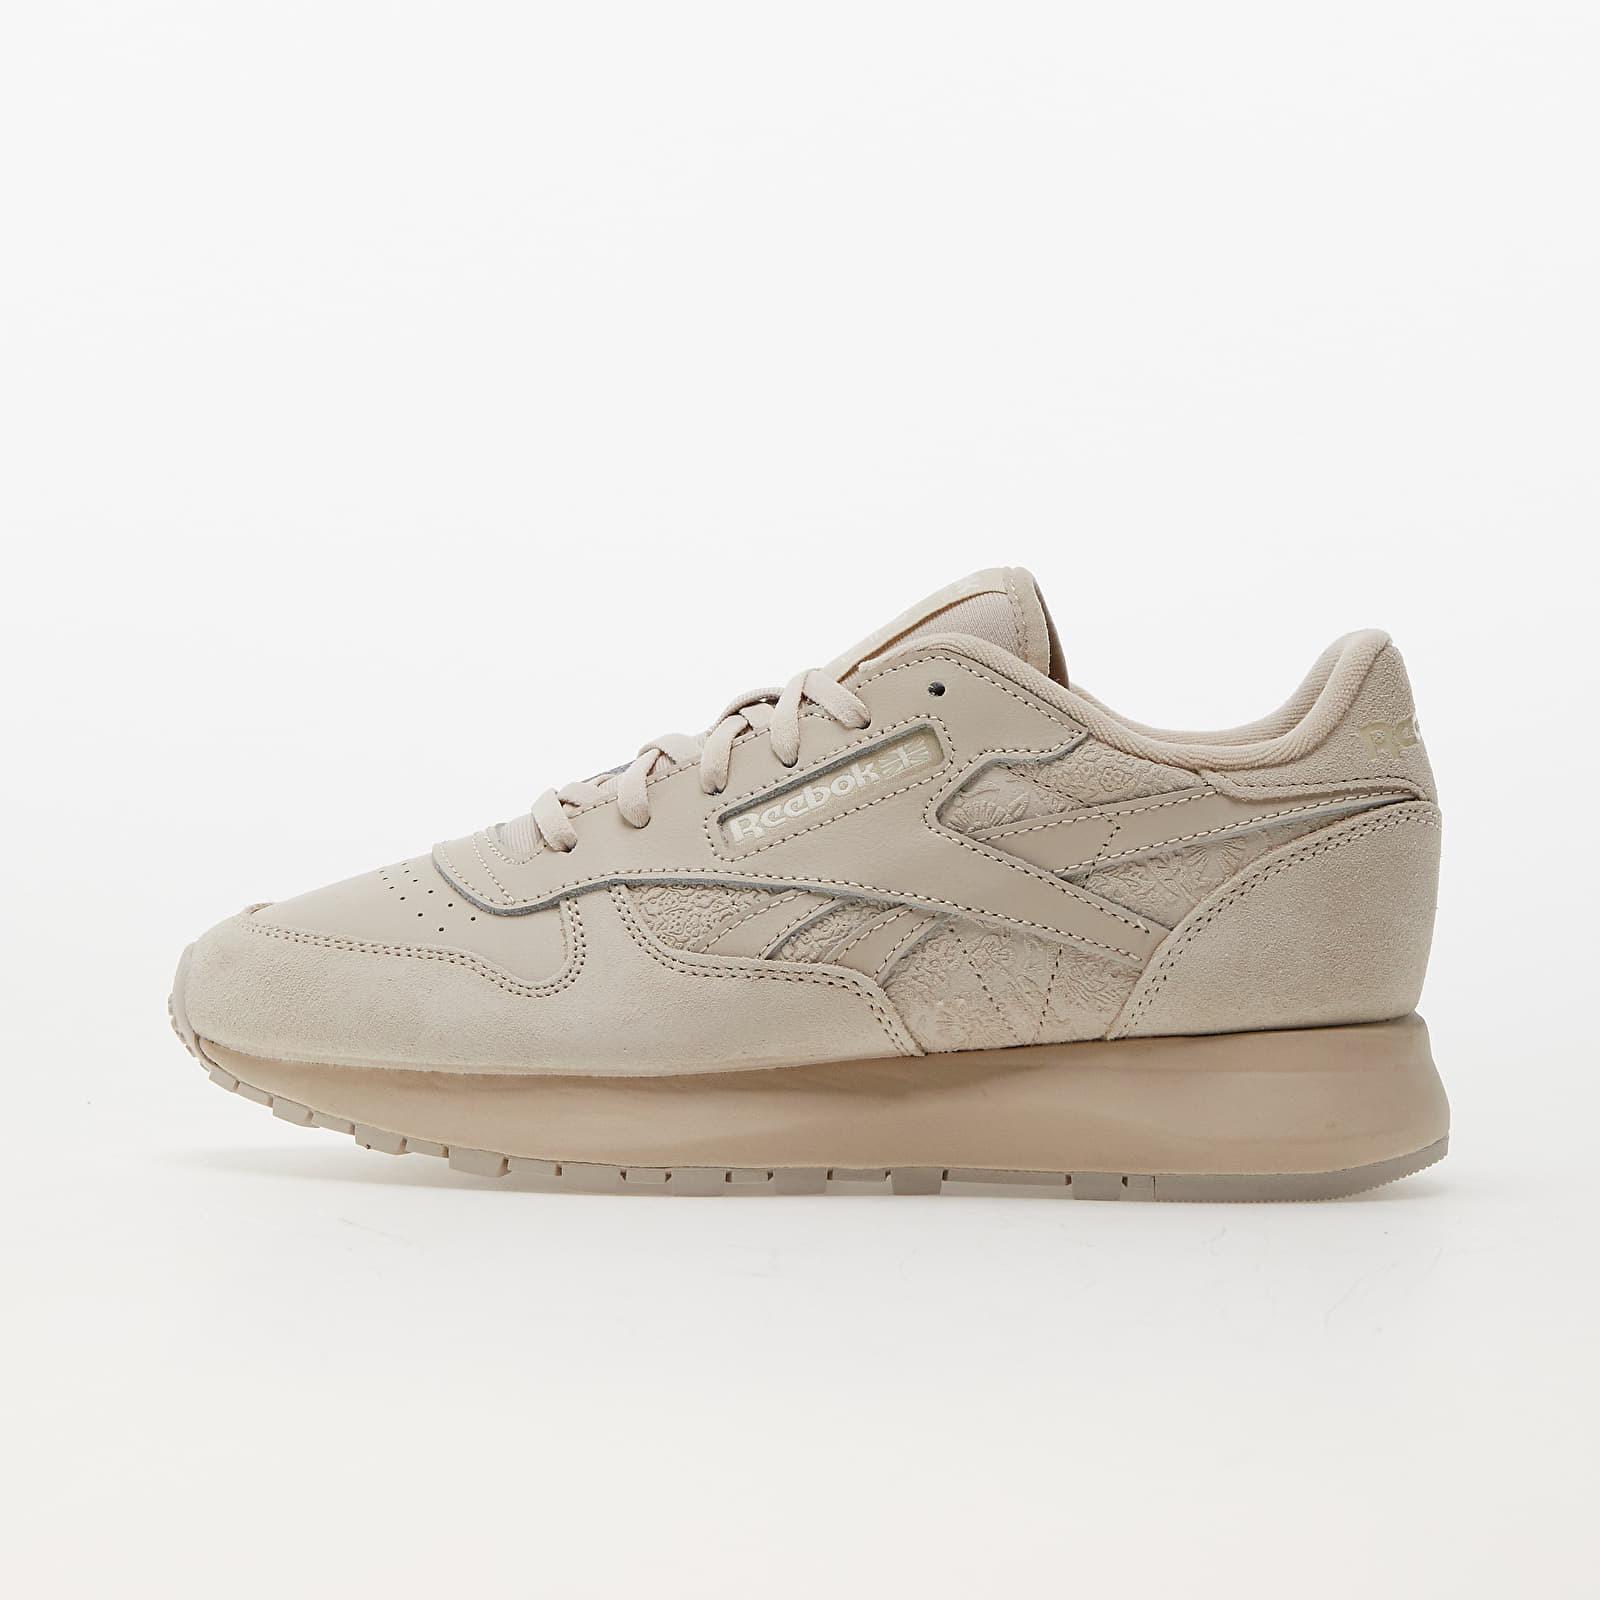 Reebok Classic Leather Sp Stucco/ Stucco/ Stucco in White | Lyst